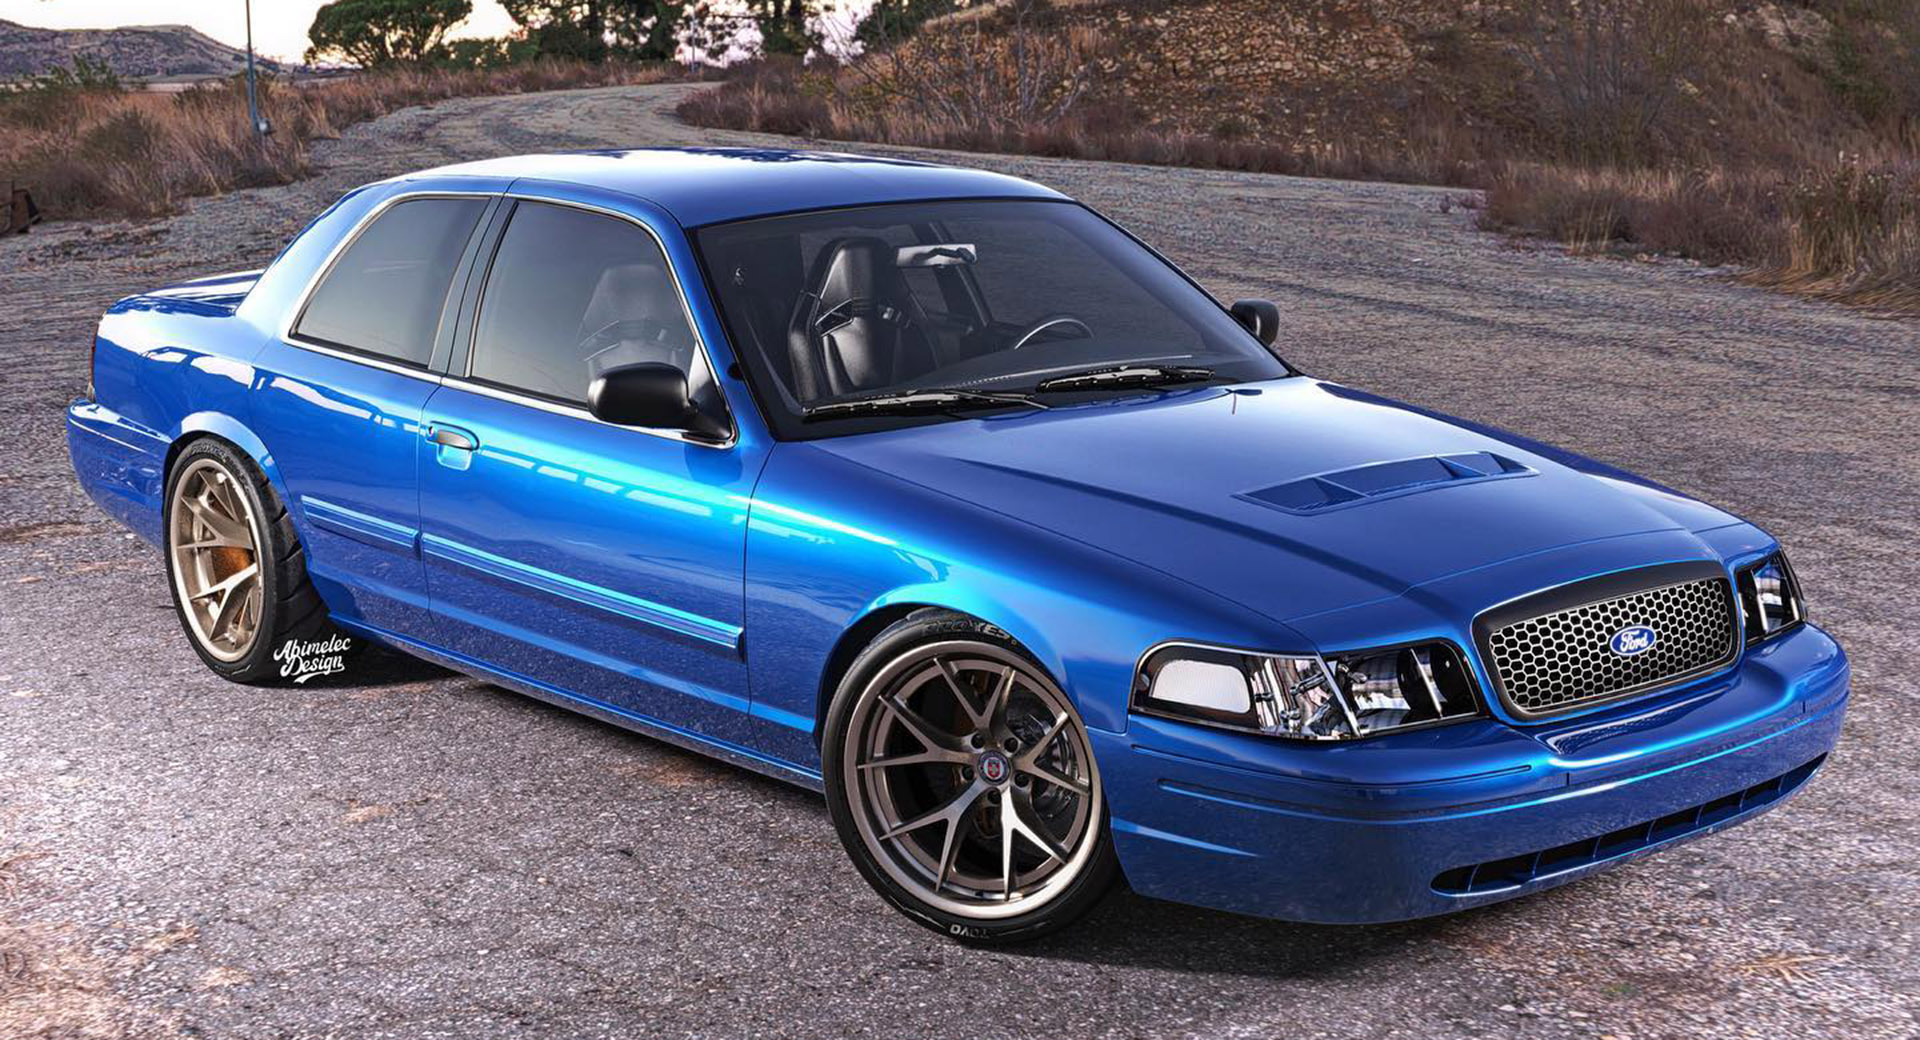 Two-Door Crown Victoria Render Is The Definition Of Muscle Car | Carscoops